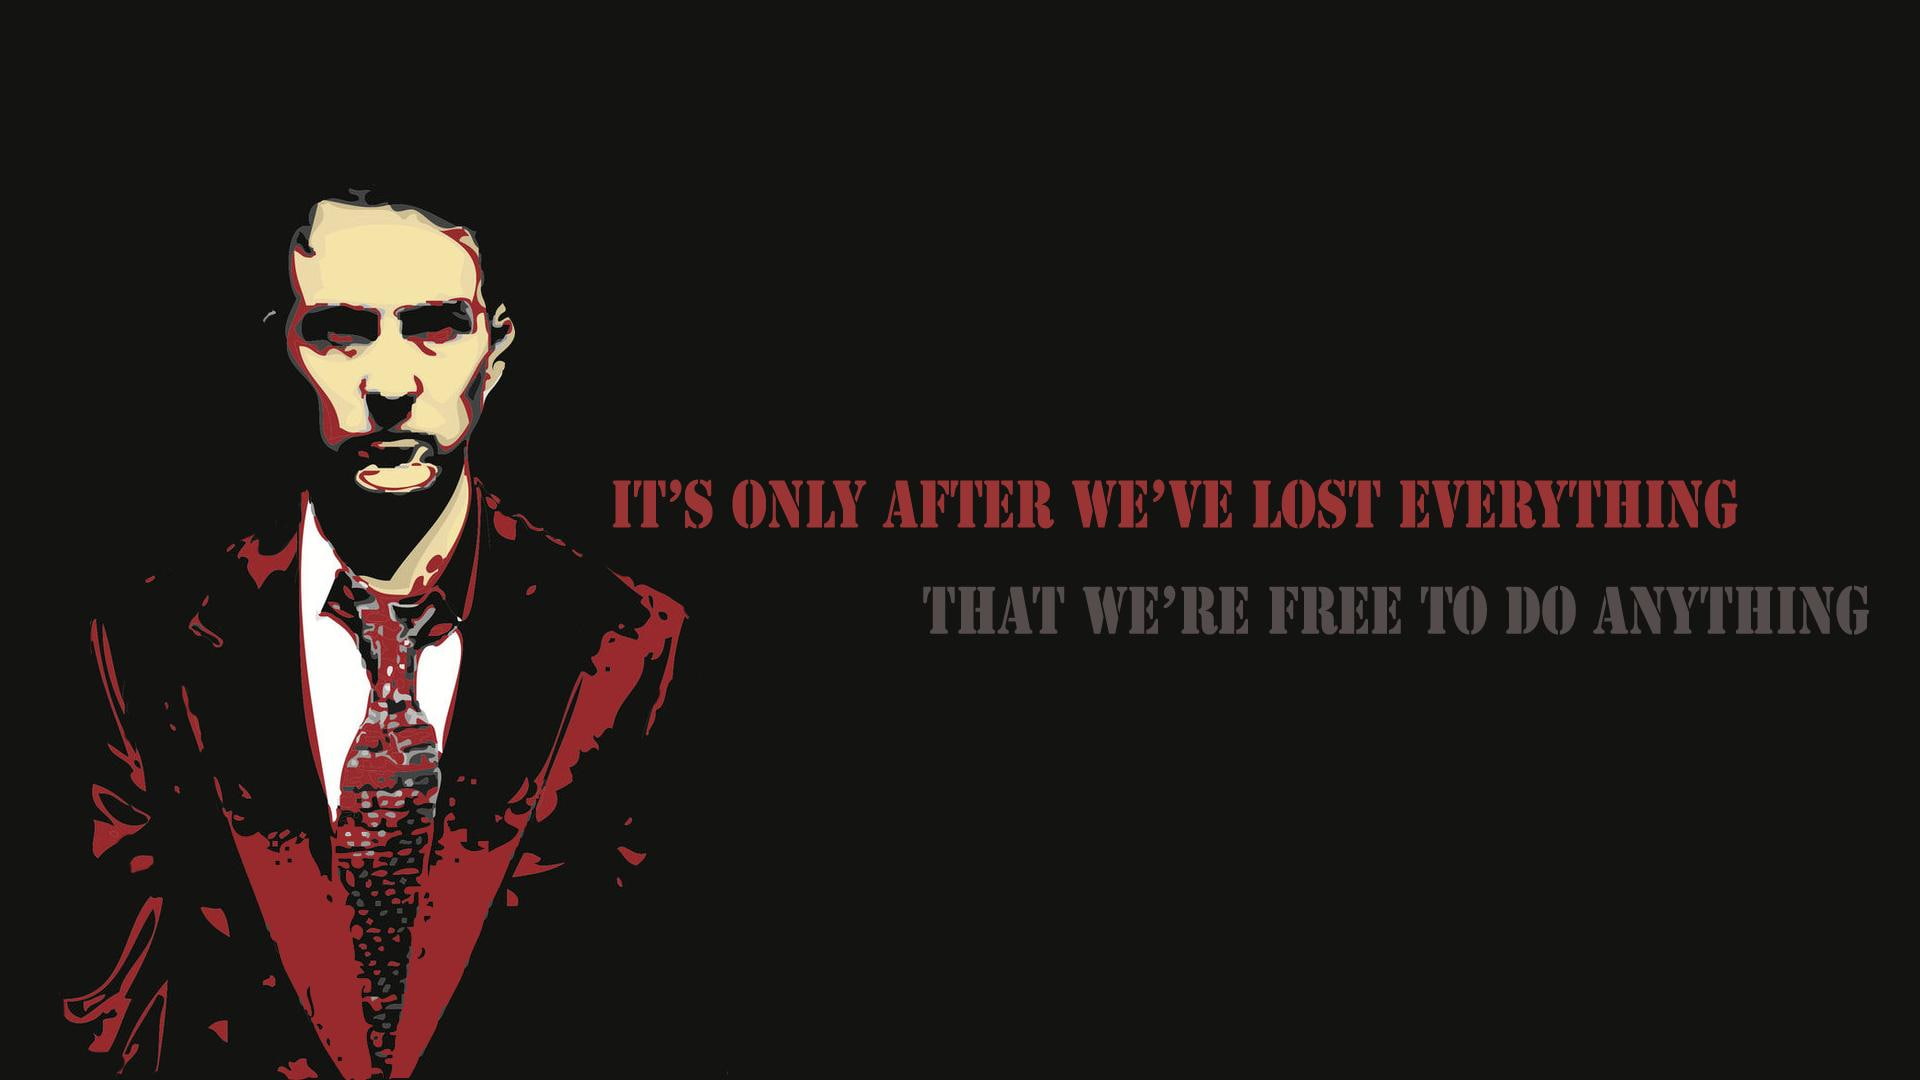 Fight Club – Do Anything HD, black, inspirational, lost everything